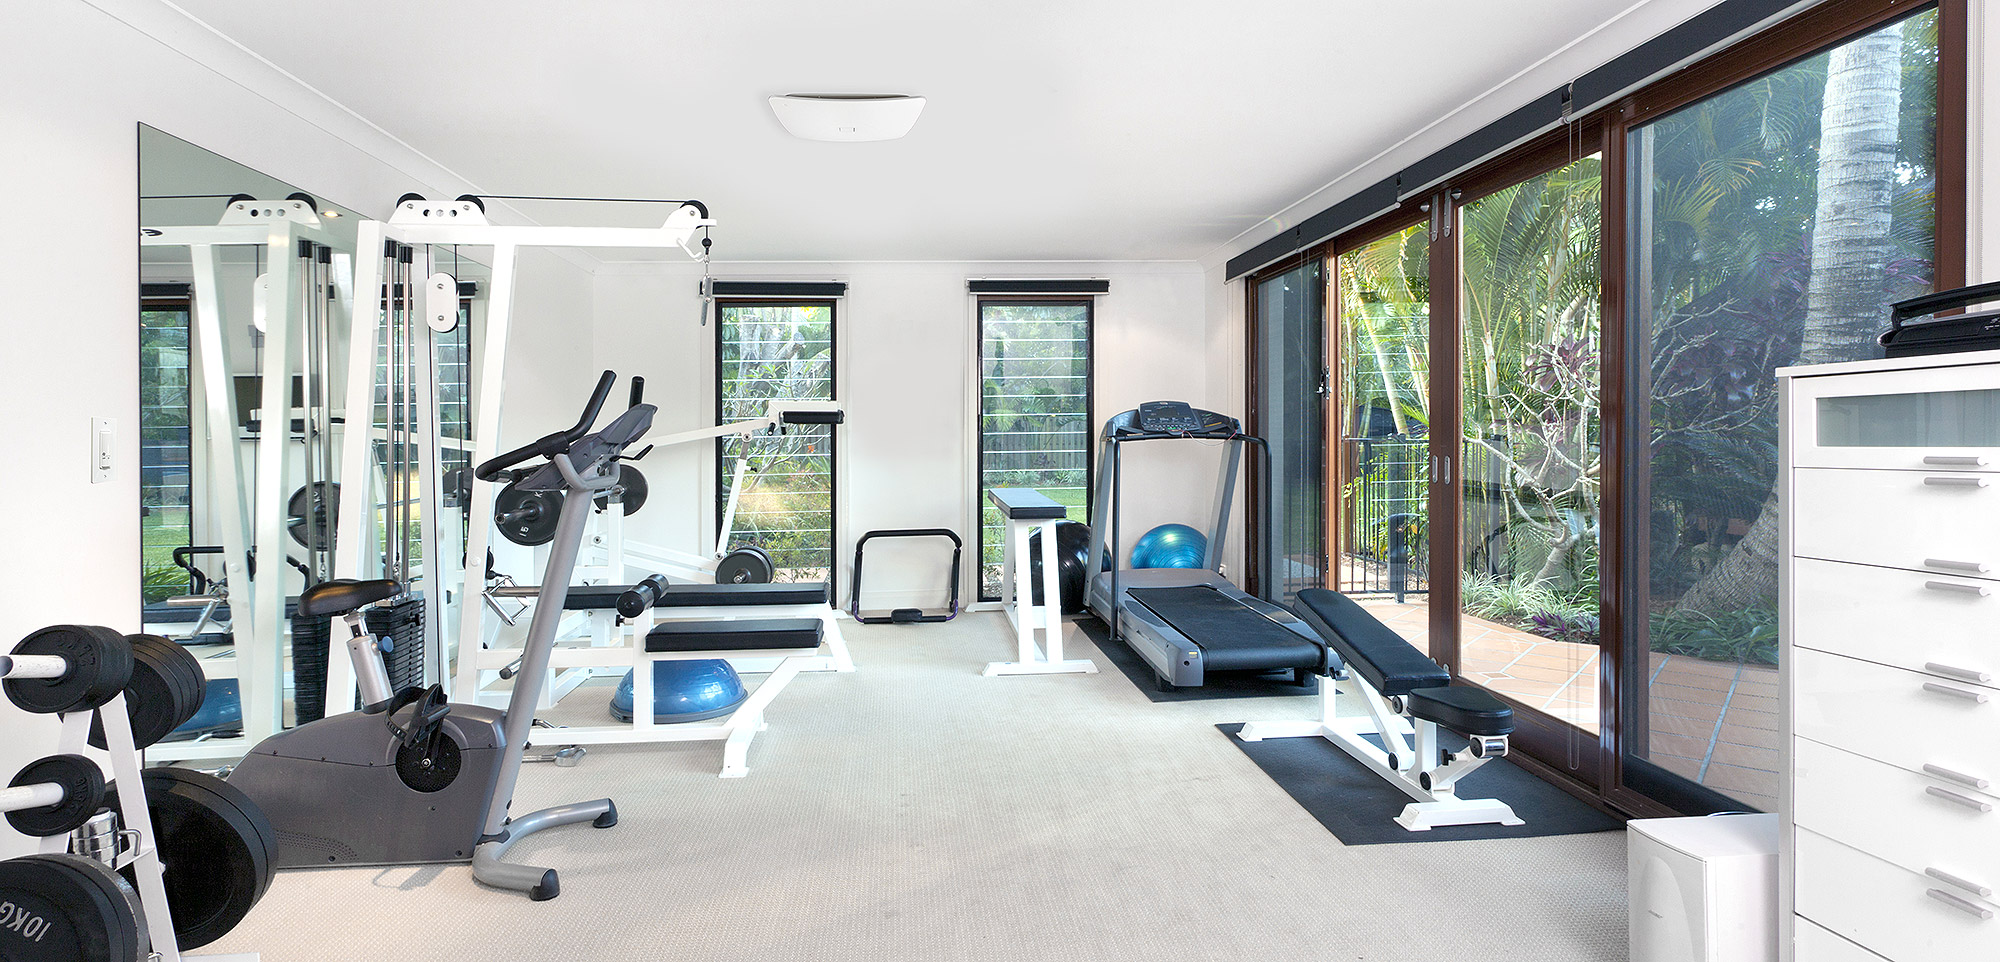 Veent — exercise room